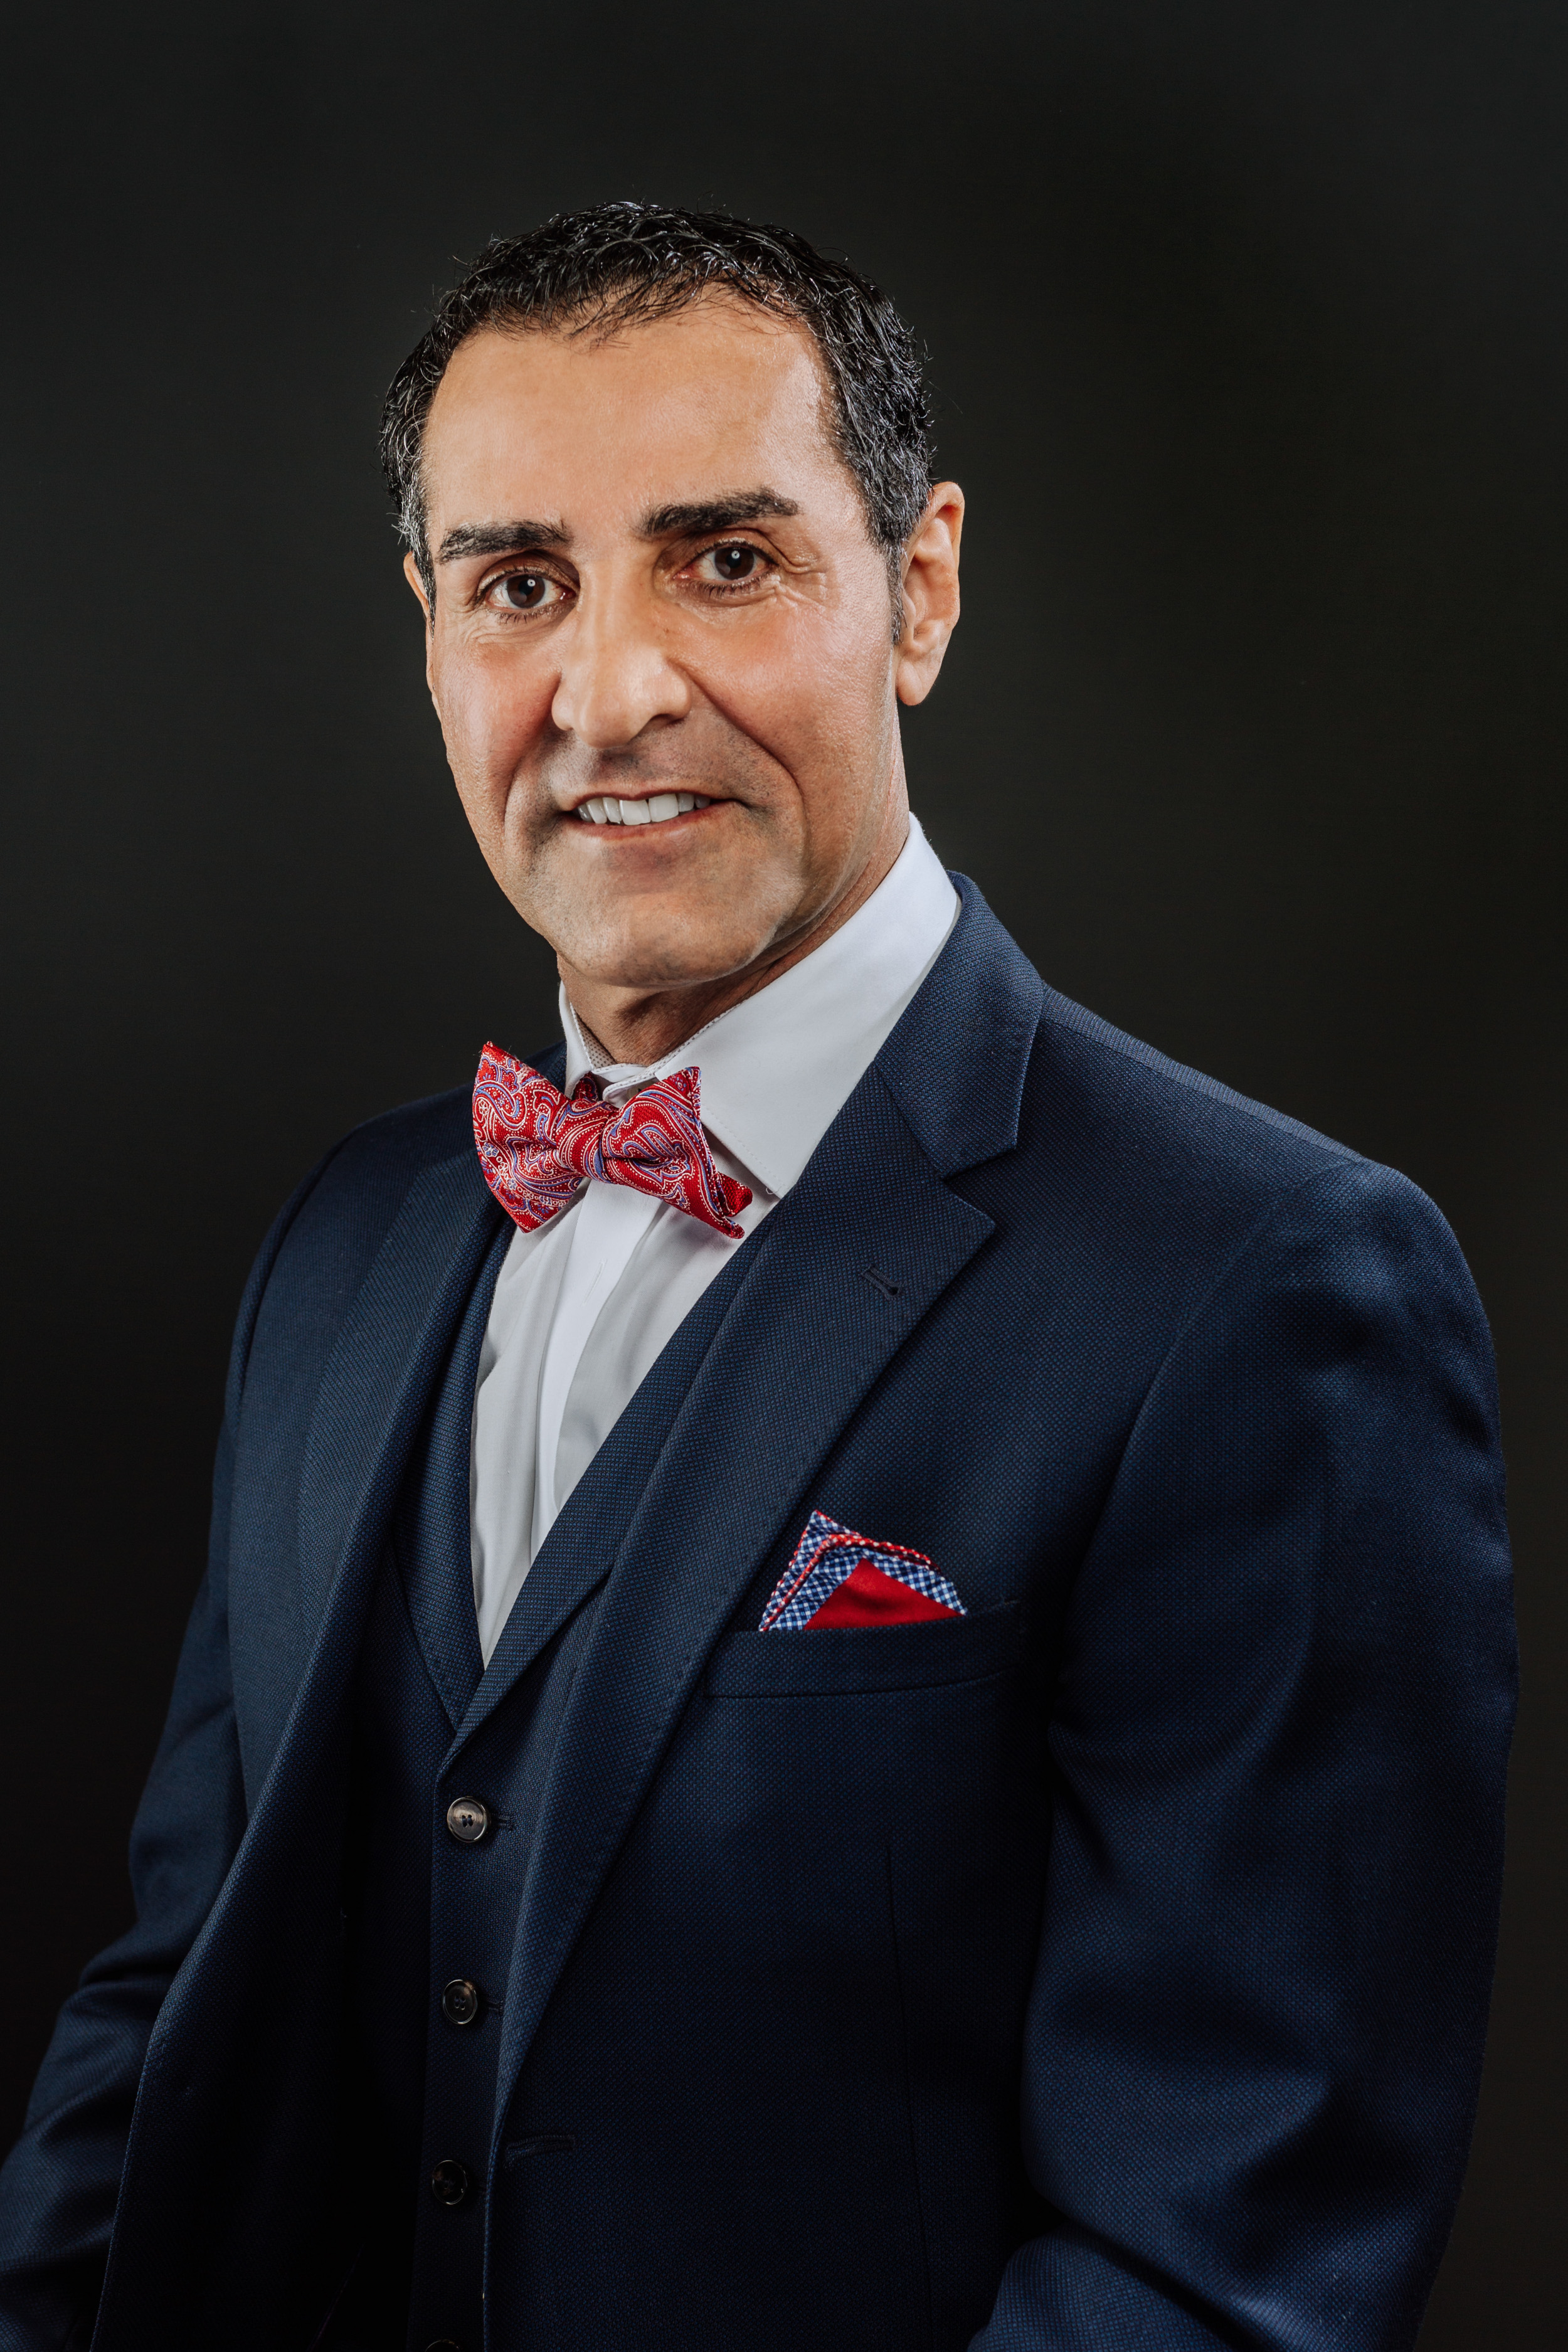 Dr. Kevin Sadati, Founder of Gallery of Cosmetic Surgery and Aesthetic Lounge